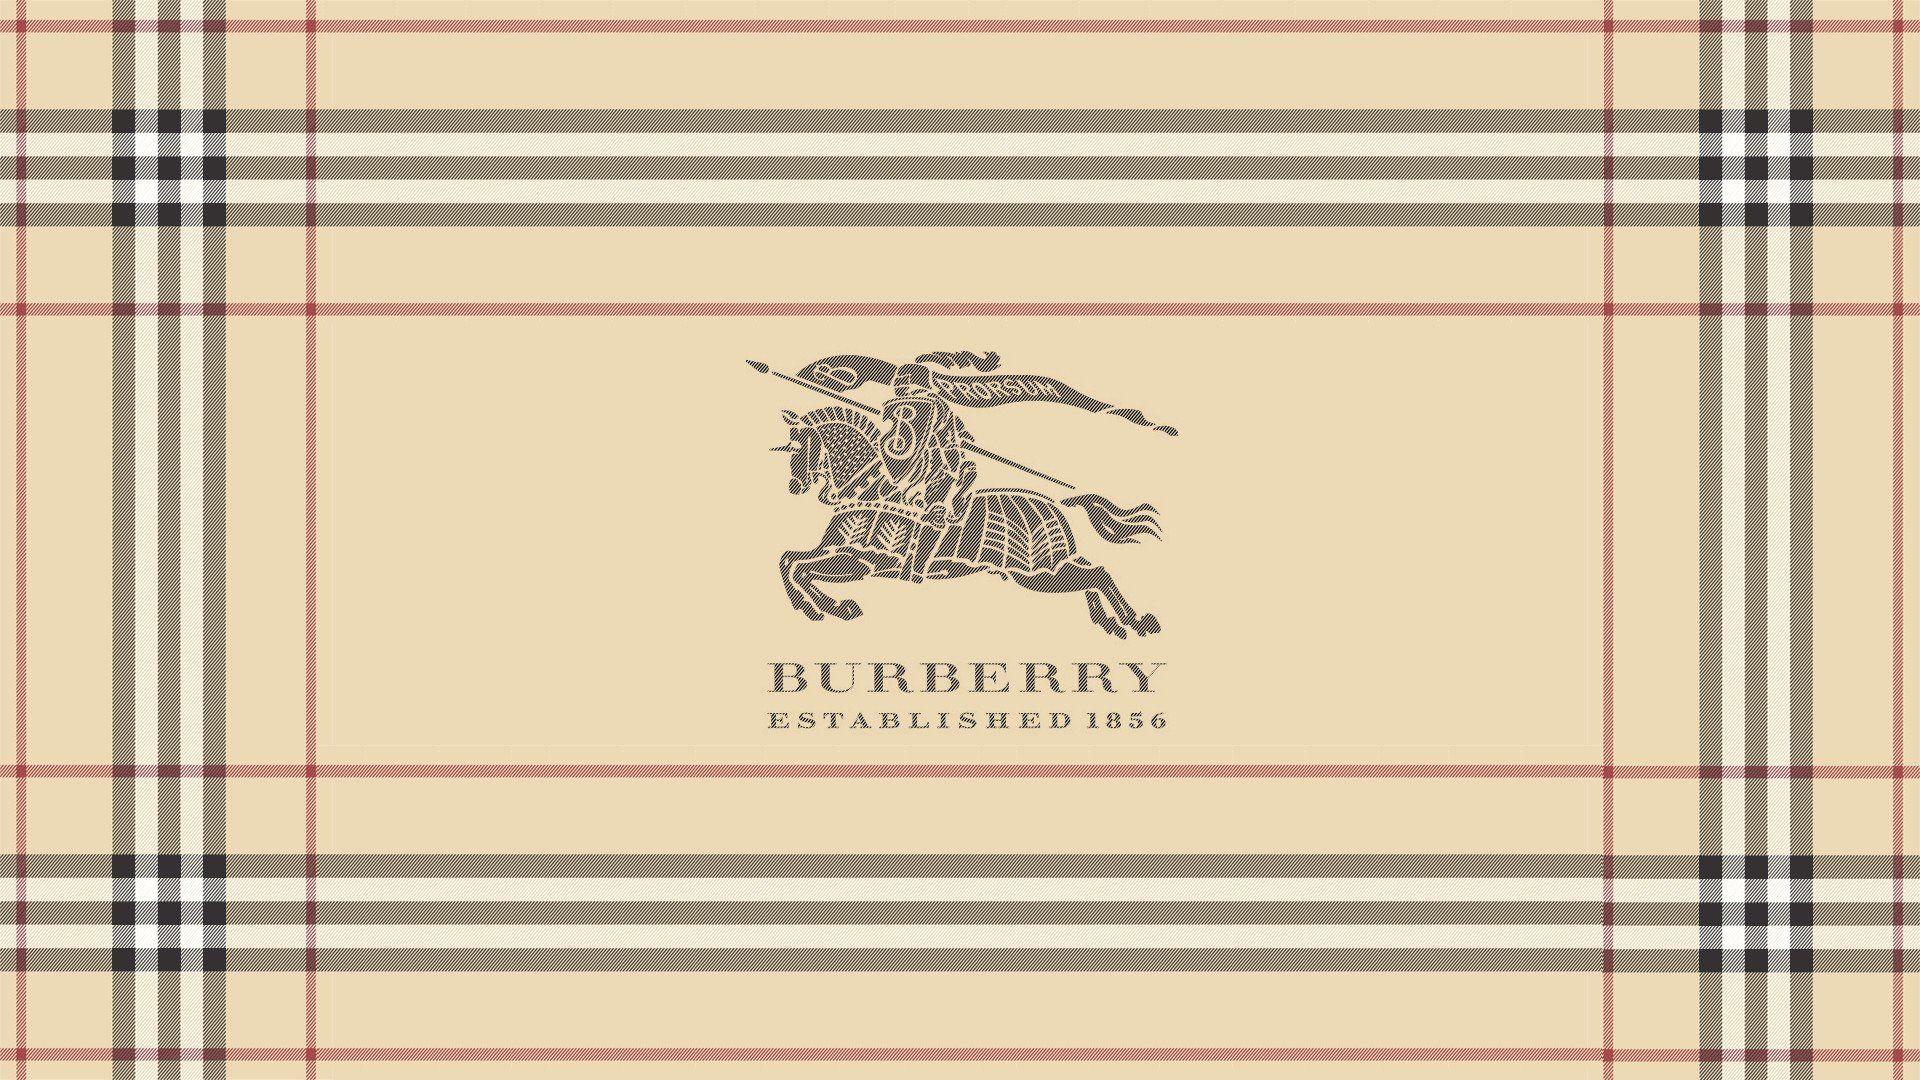 Burberry Logo Wallpapers - Top Free Burberry Logo Backgrounds ...